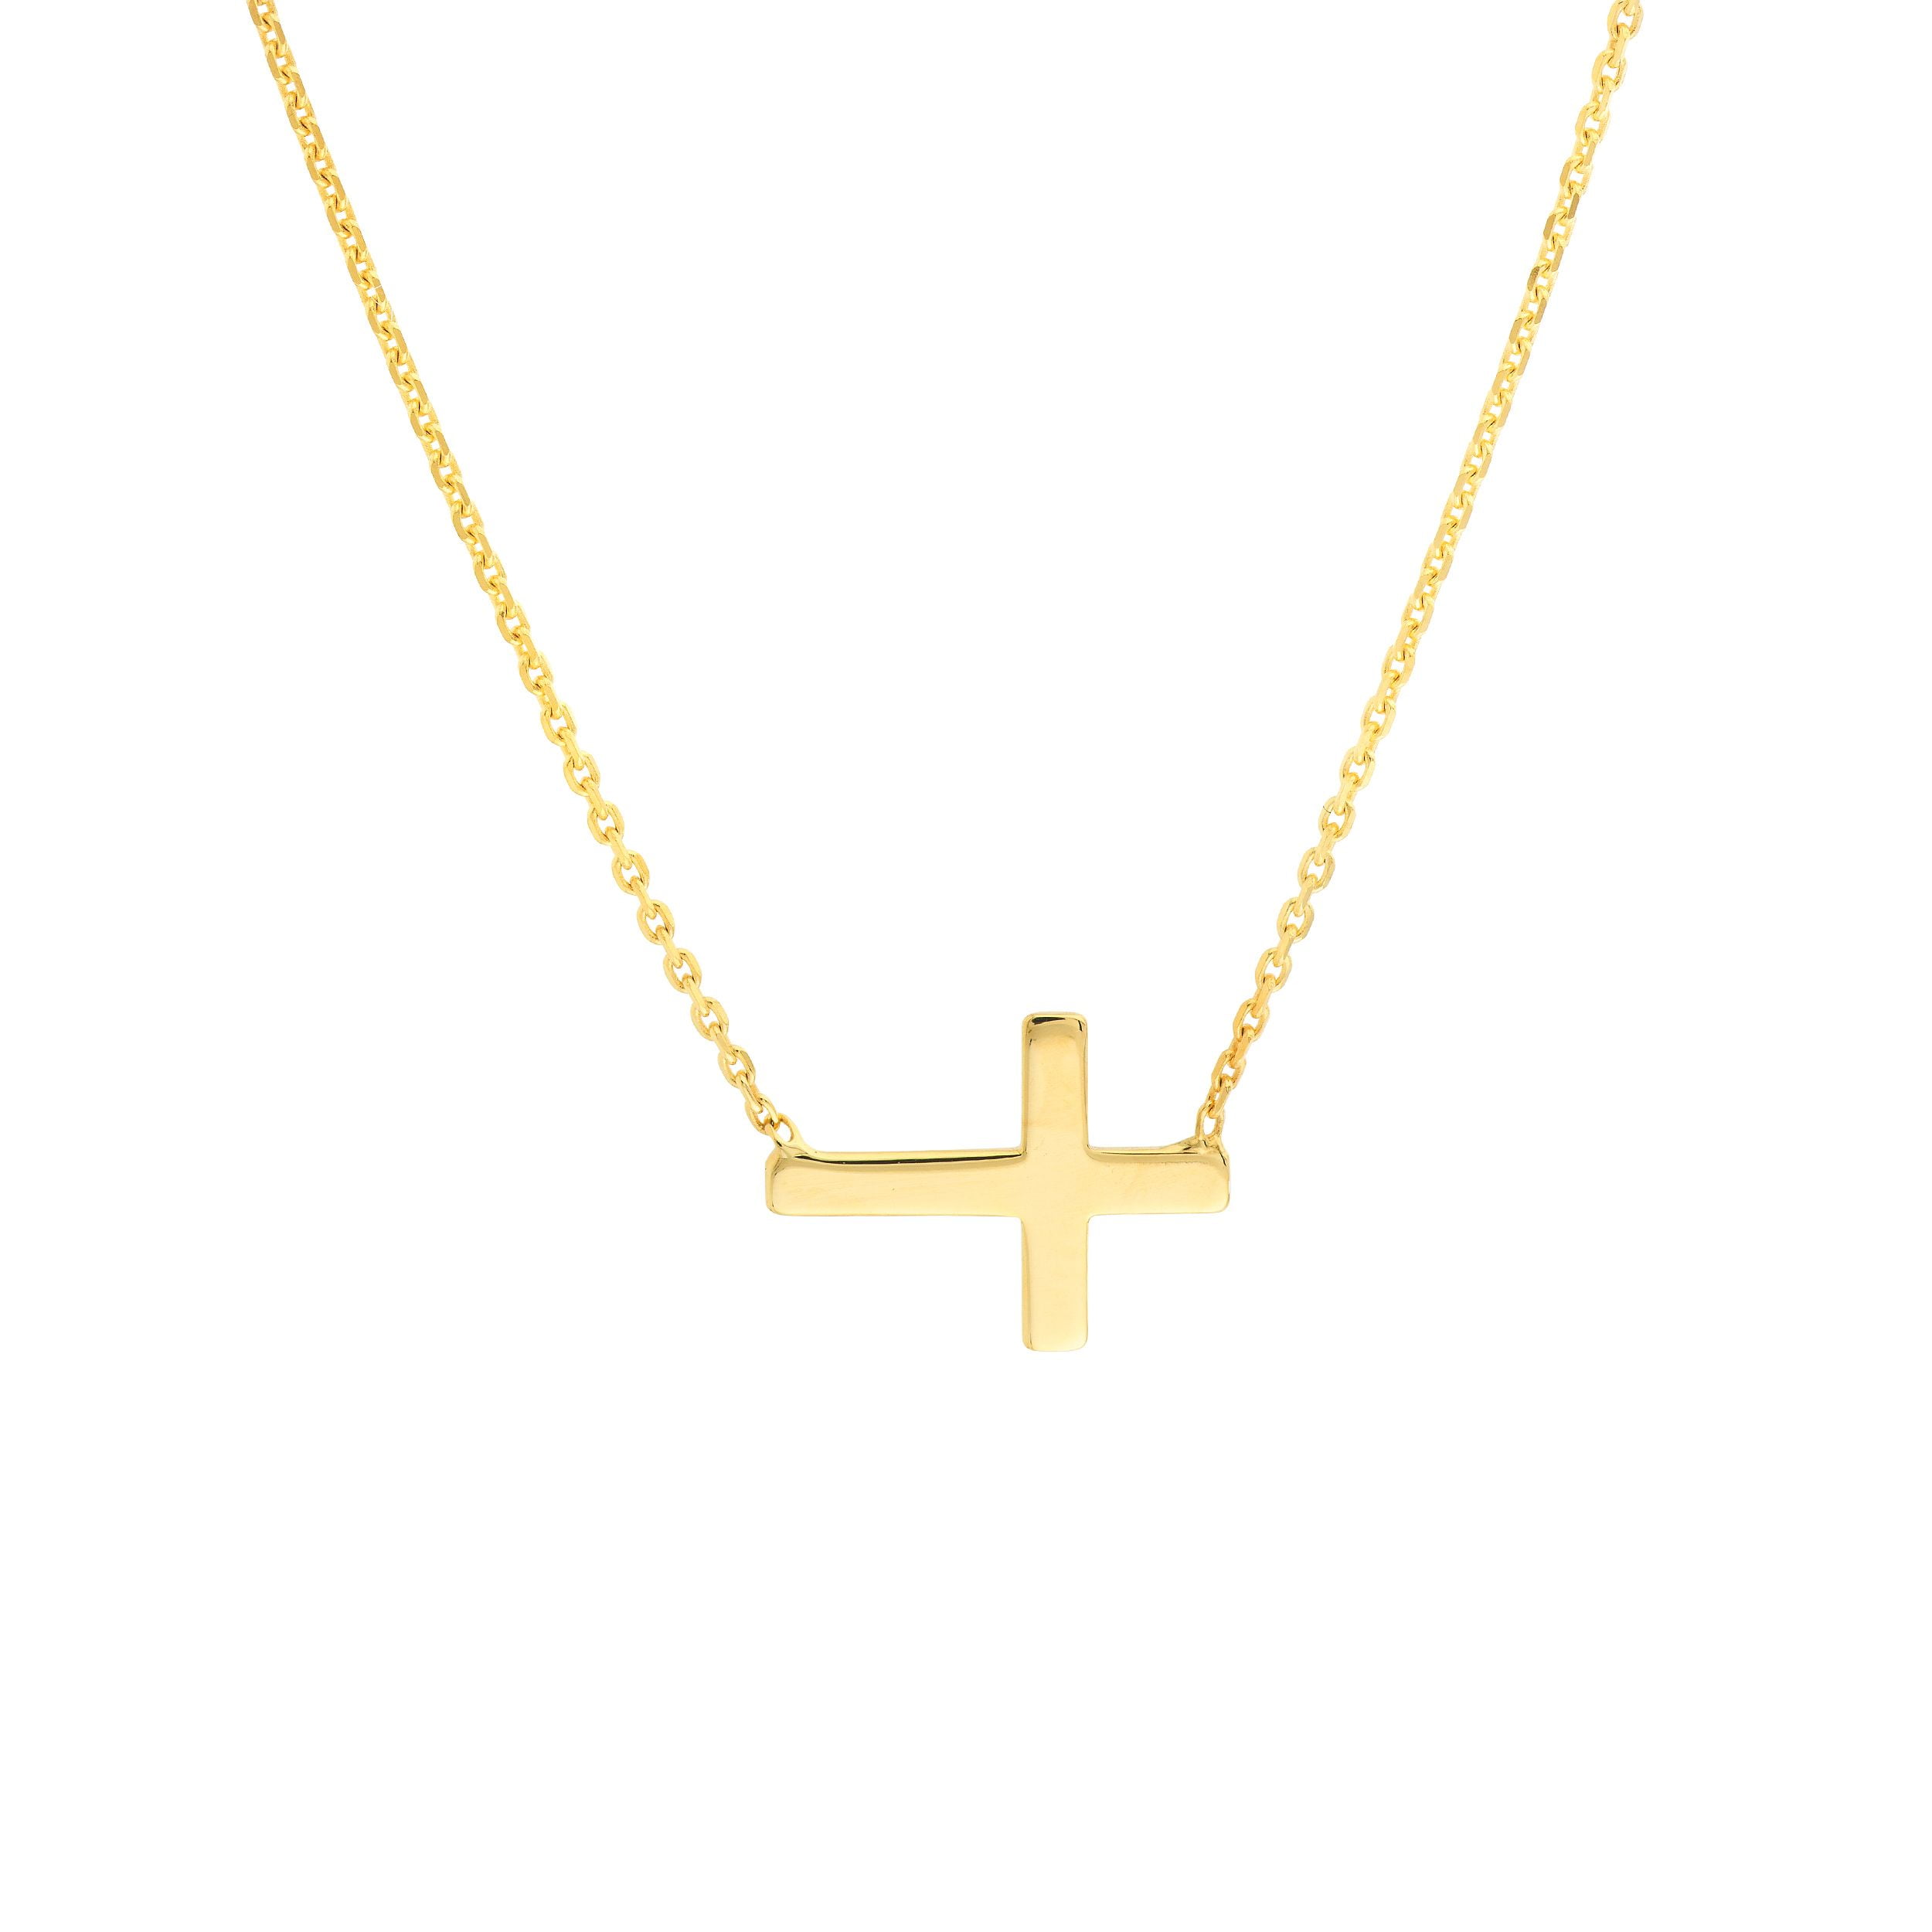 14K Yellow Gold Cross Pendant on an Adjustable 14K Yellow Gold Chain Necklace